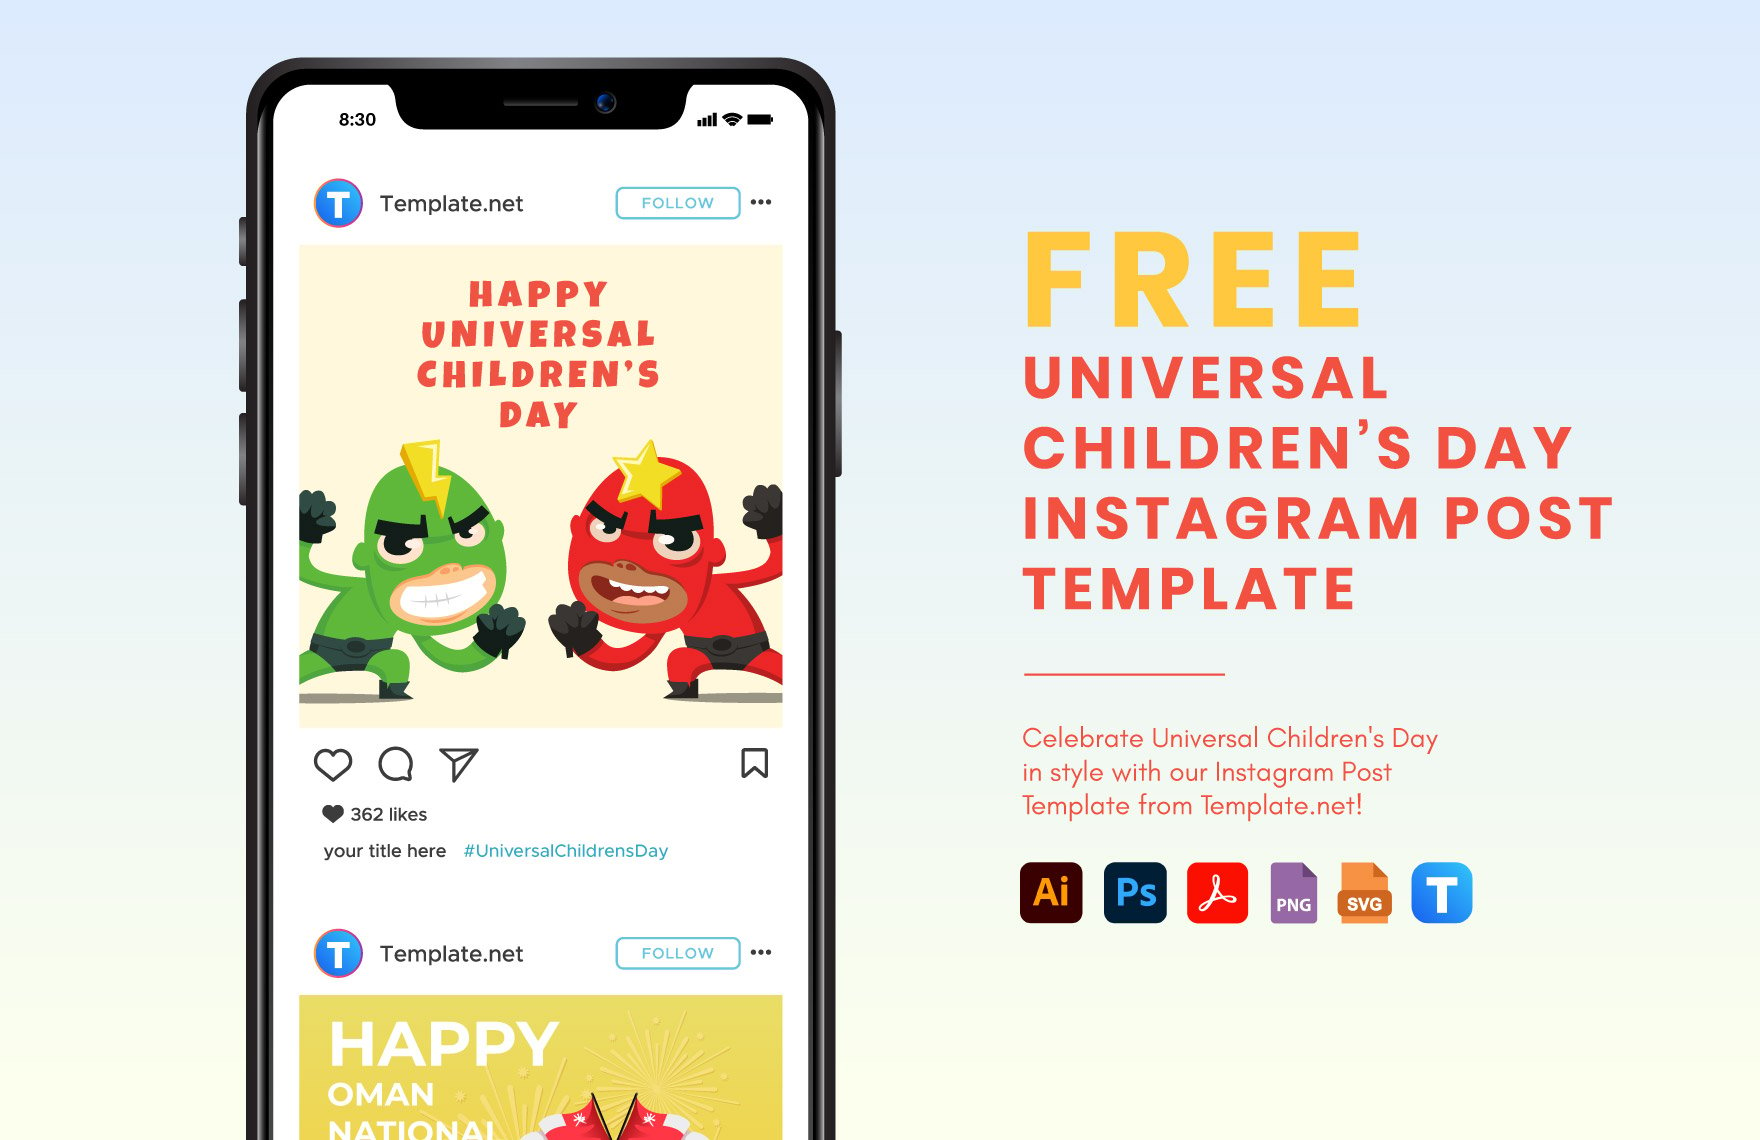 Free Universal Children’s Day Instagram Post Template in PDF, Illustrator, PSD, SVG, PNG